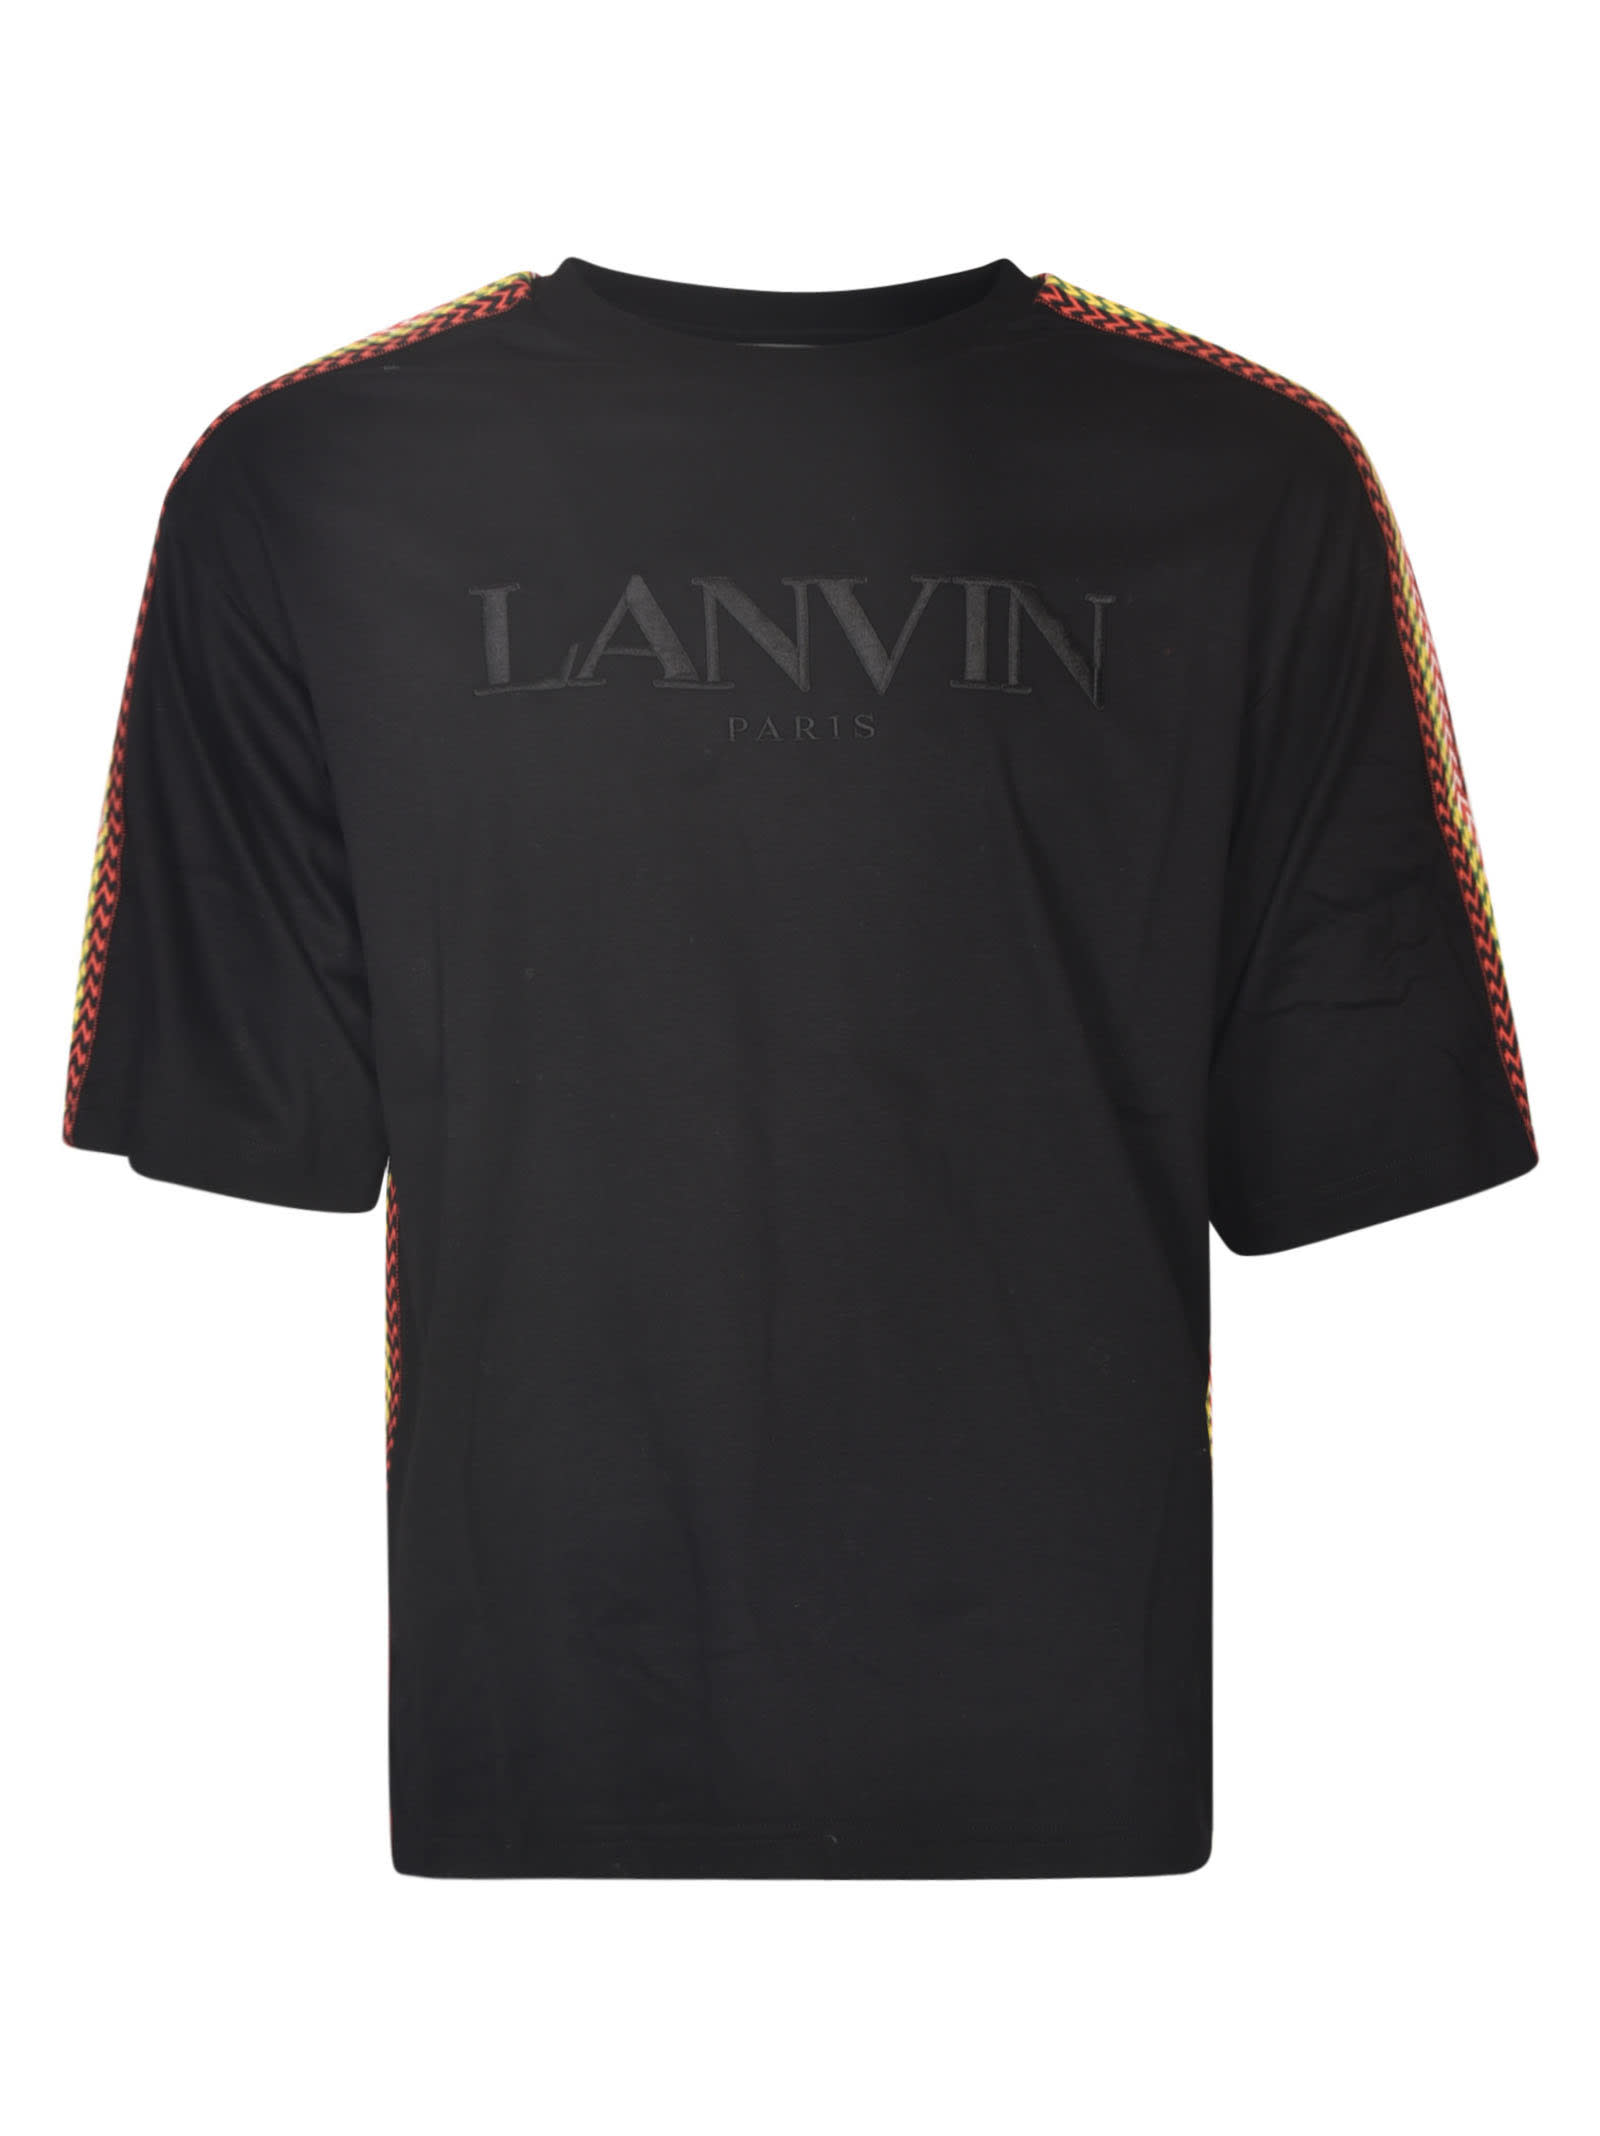 LANVIN LOGO EMBROIDERED T-SHIRT